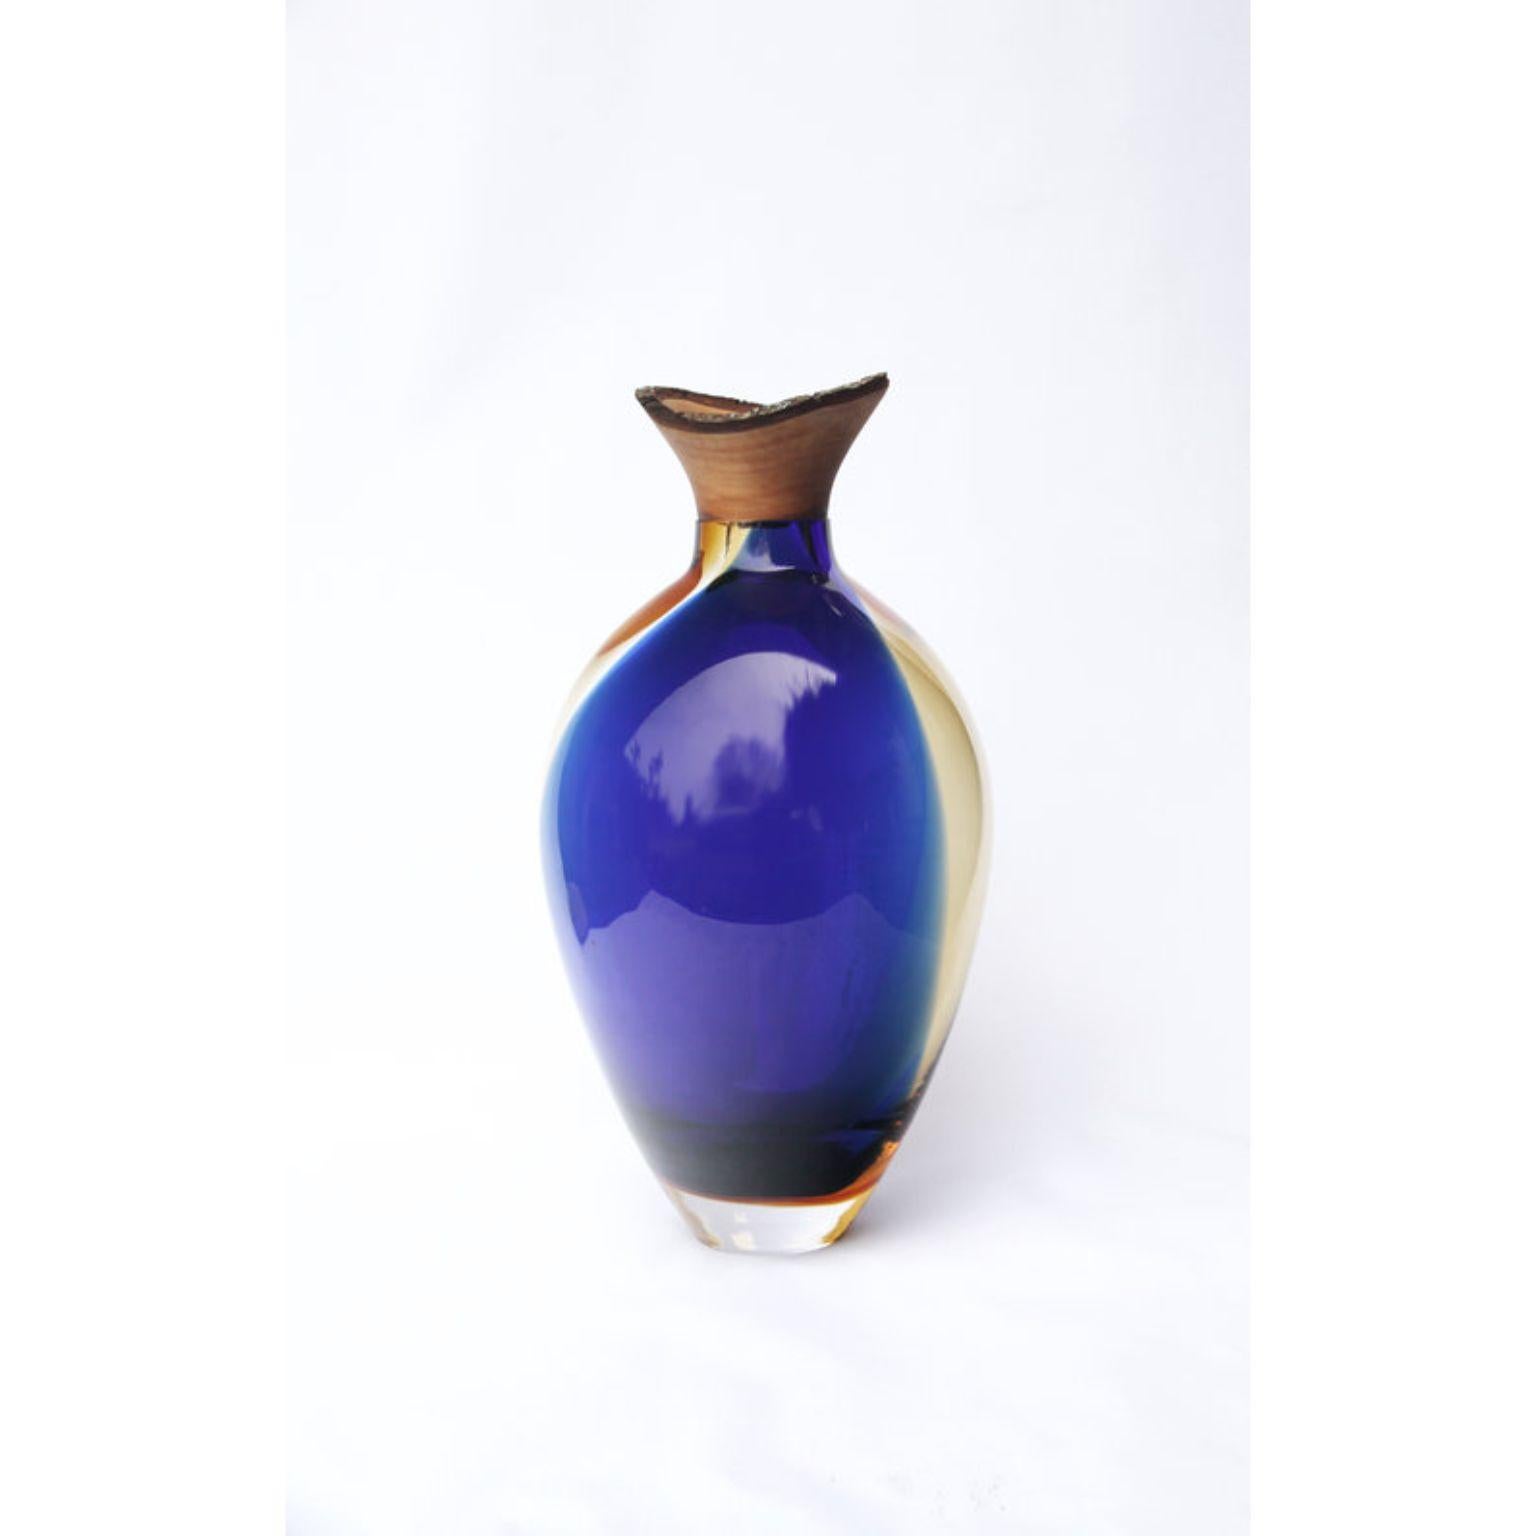 Blue and amber sculpted blown glass, Pia Wüstenberg
Dimensions: Height 45 x diameter 25cm
Materials: Hand blown glass

Pia Wüstenberg, Utopia
Pia Wüstenberg is a creative with a passion for materials and craft. She graduated from the Royal